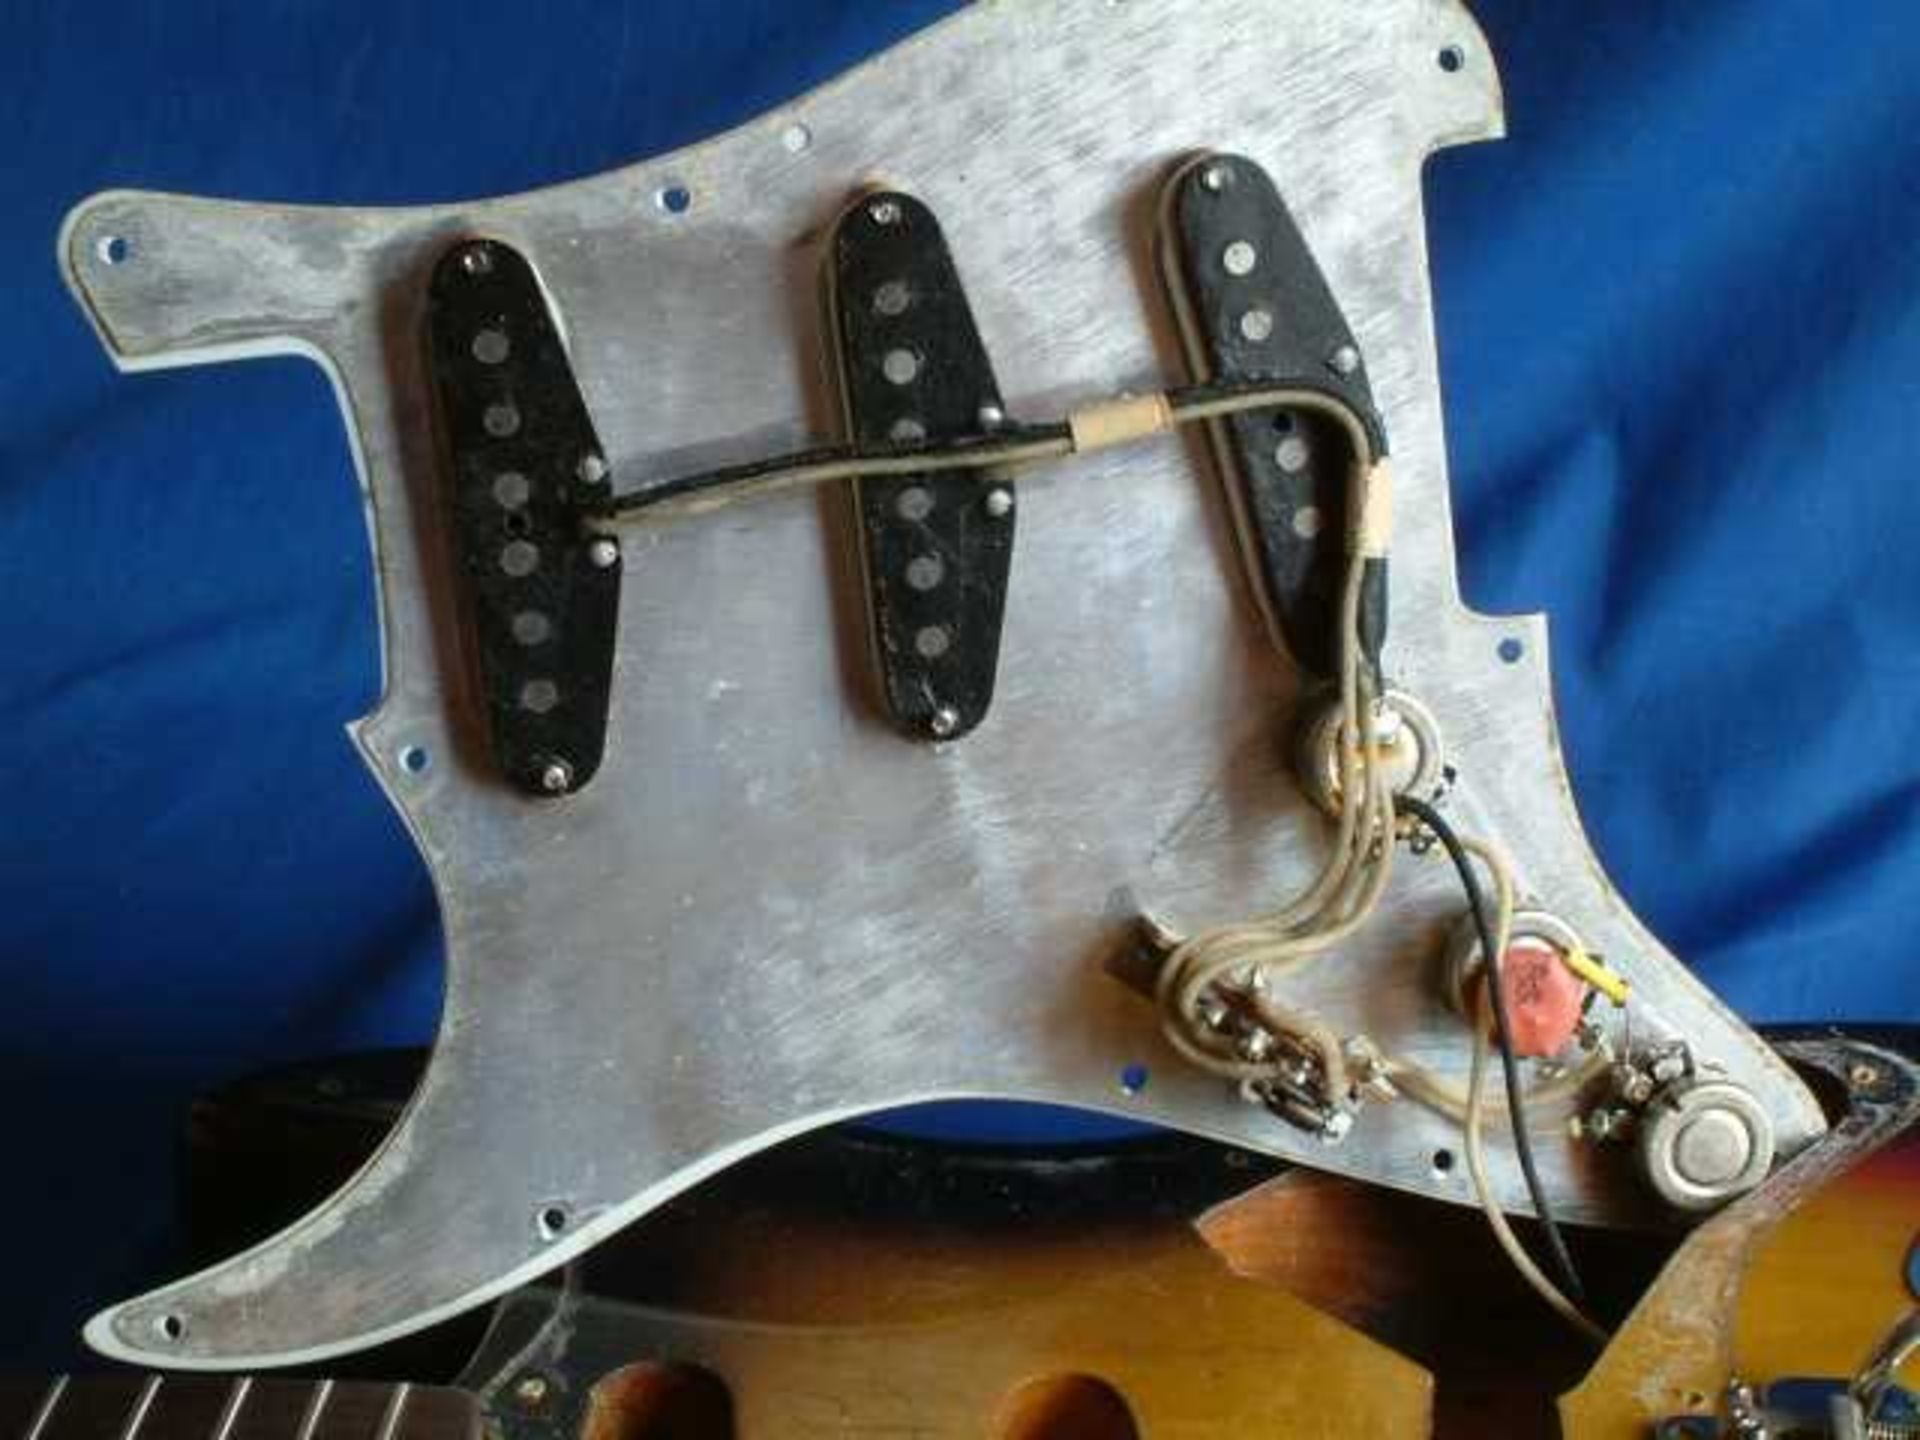 A 1963 Fender Stratocaster electric guitar, - Image 24 of 32